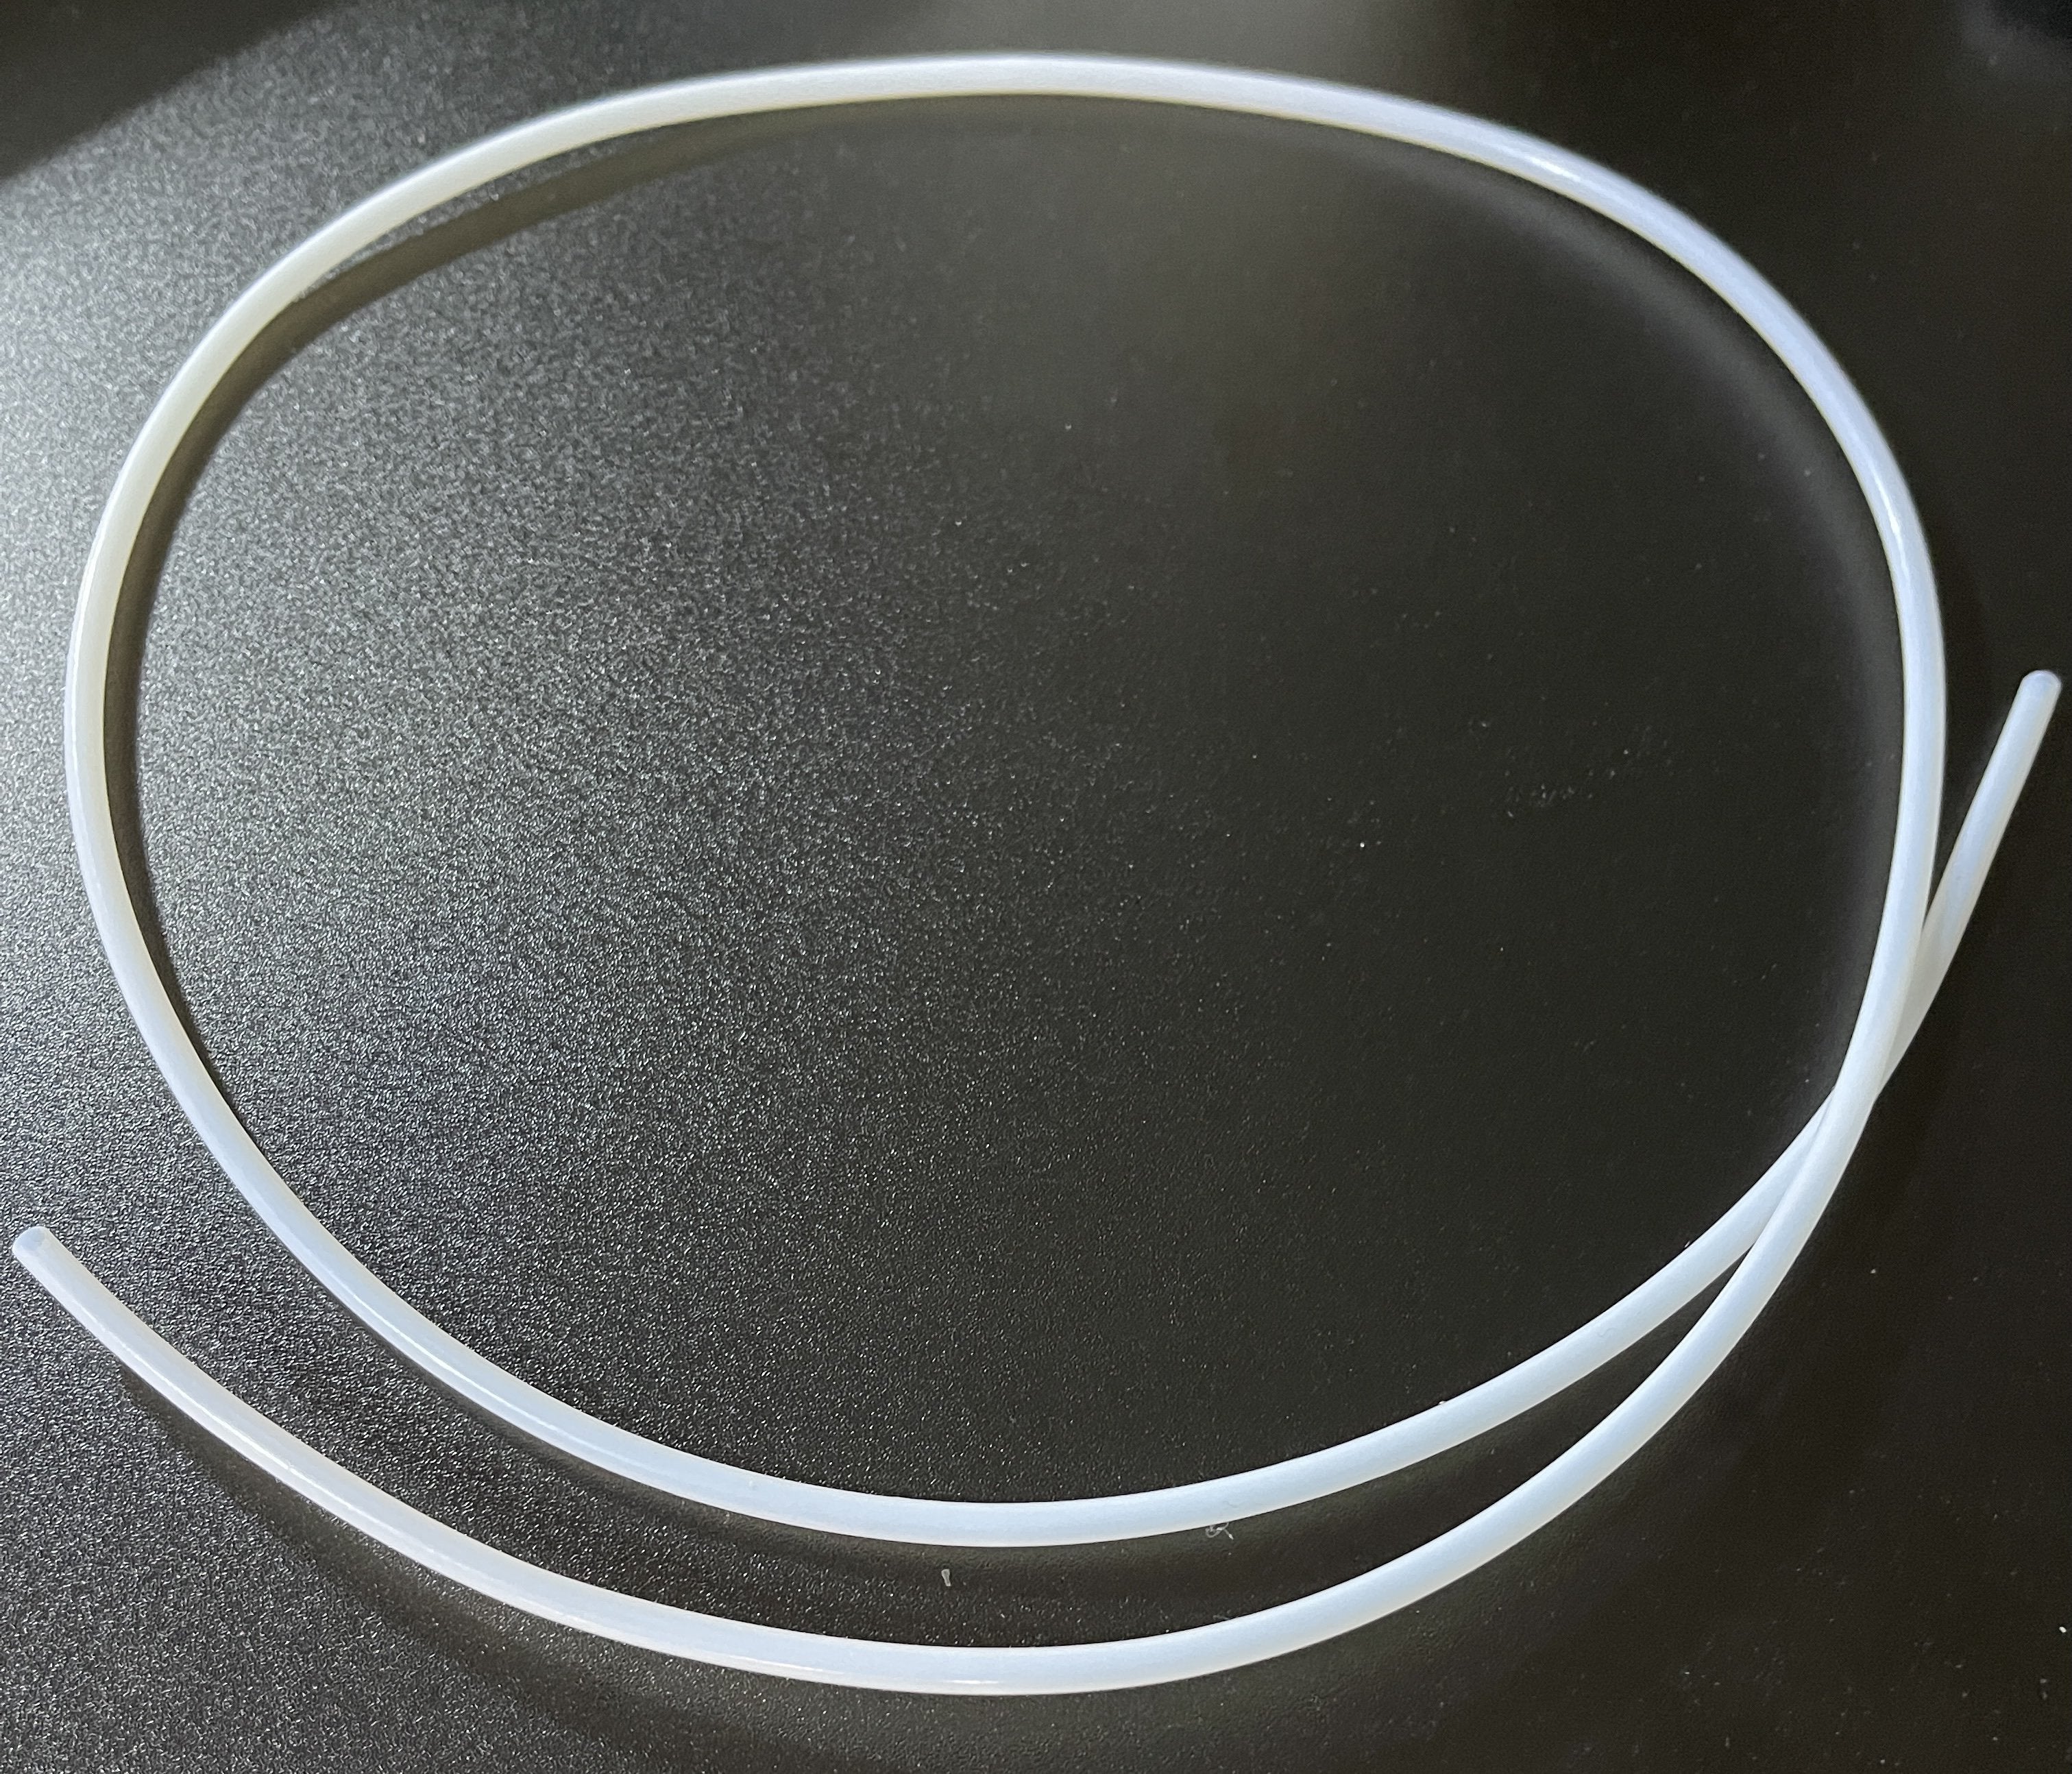 PTFE tube 4mm x 6mm √ 100+ diameters shipped from stock